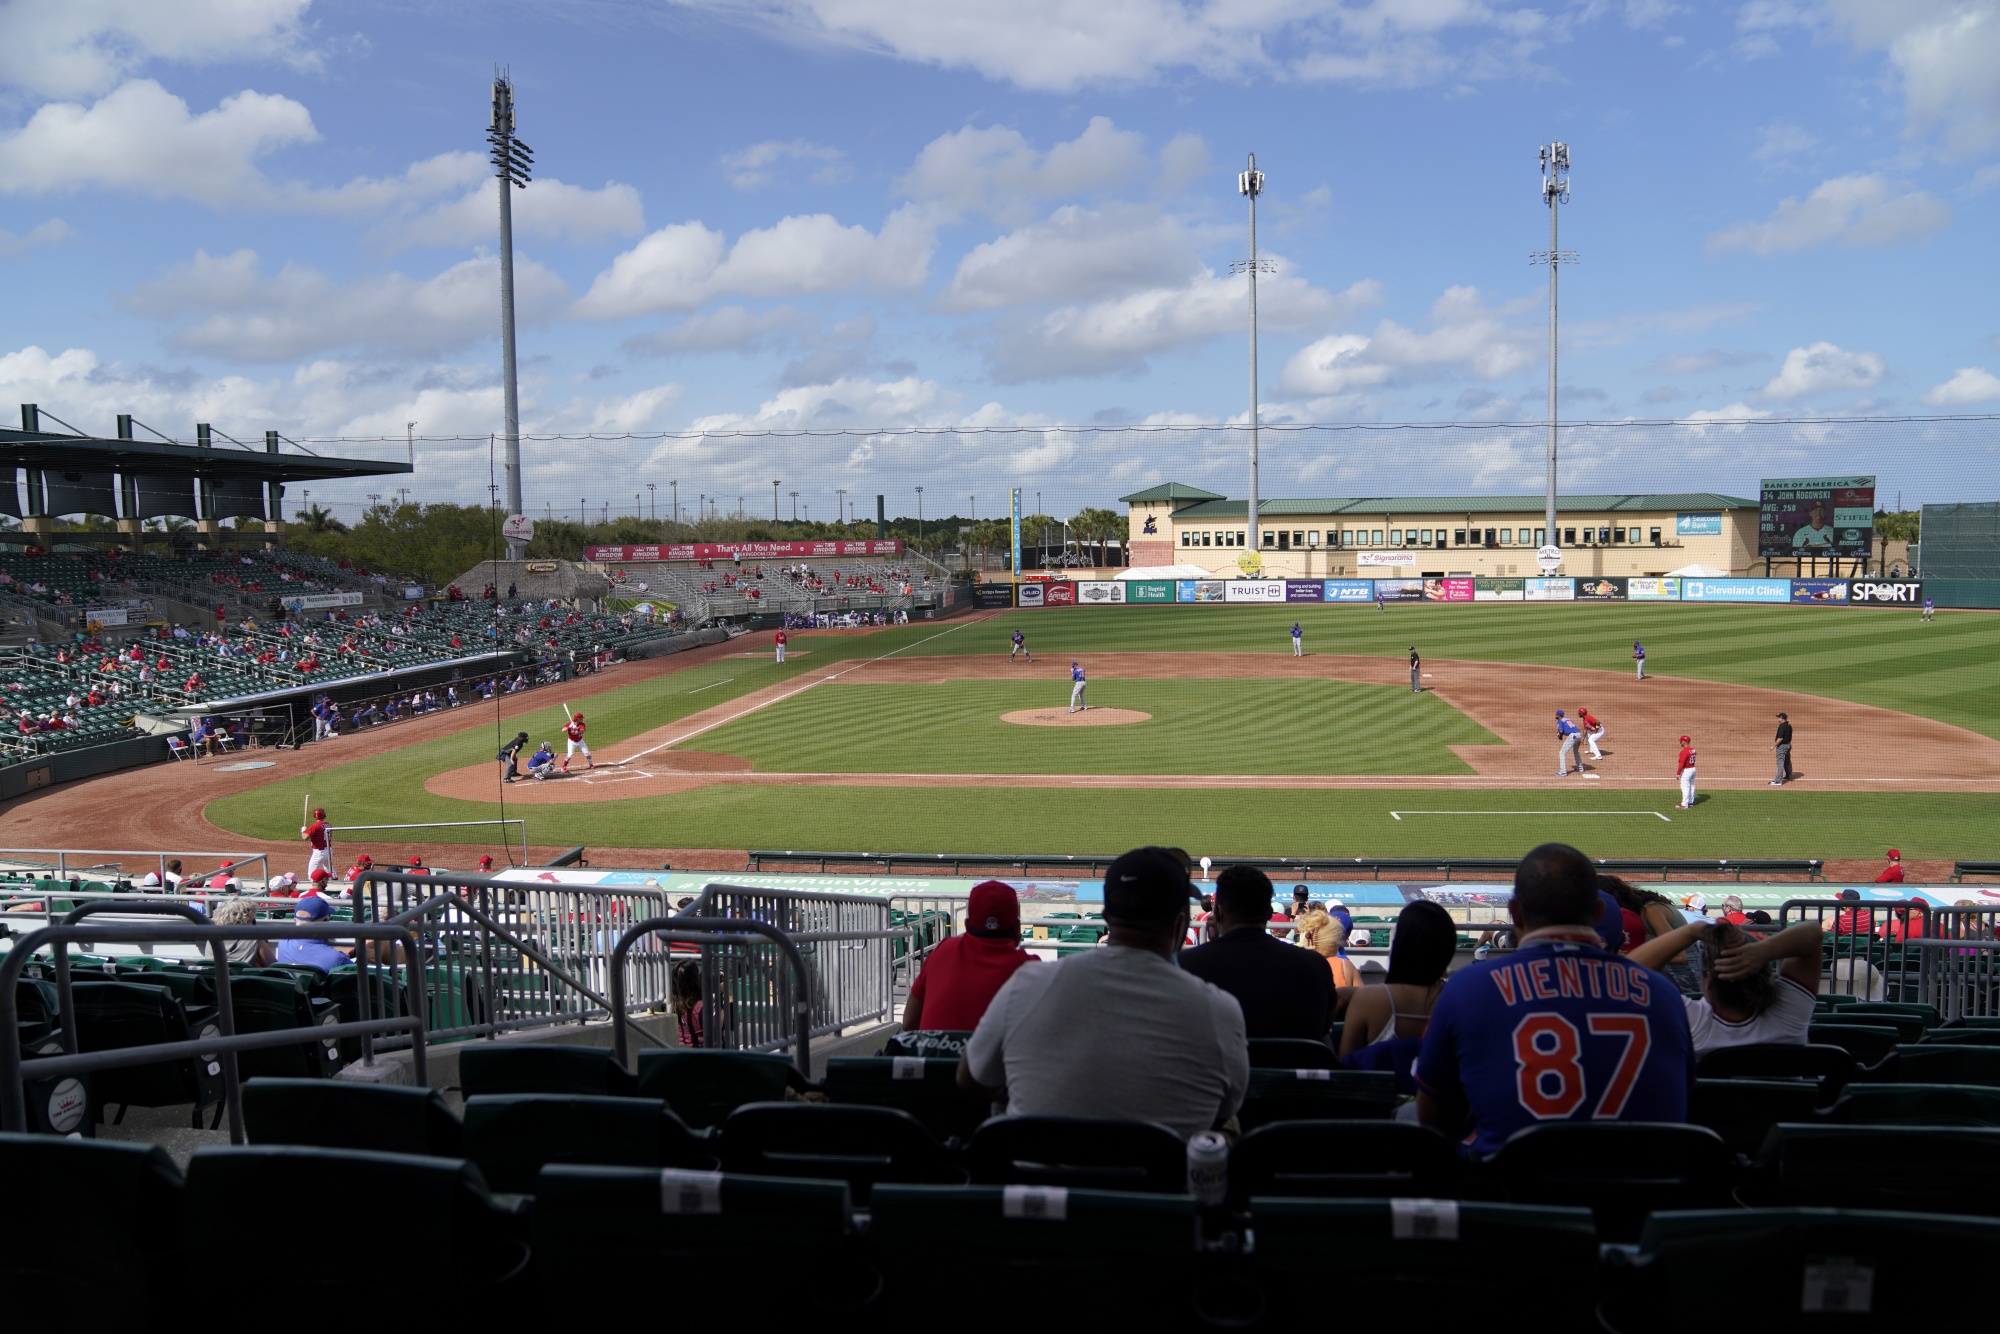 Renovating the Mets spring training home now would cost $57 million